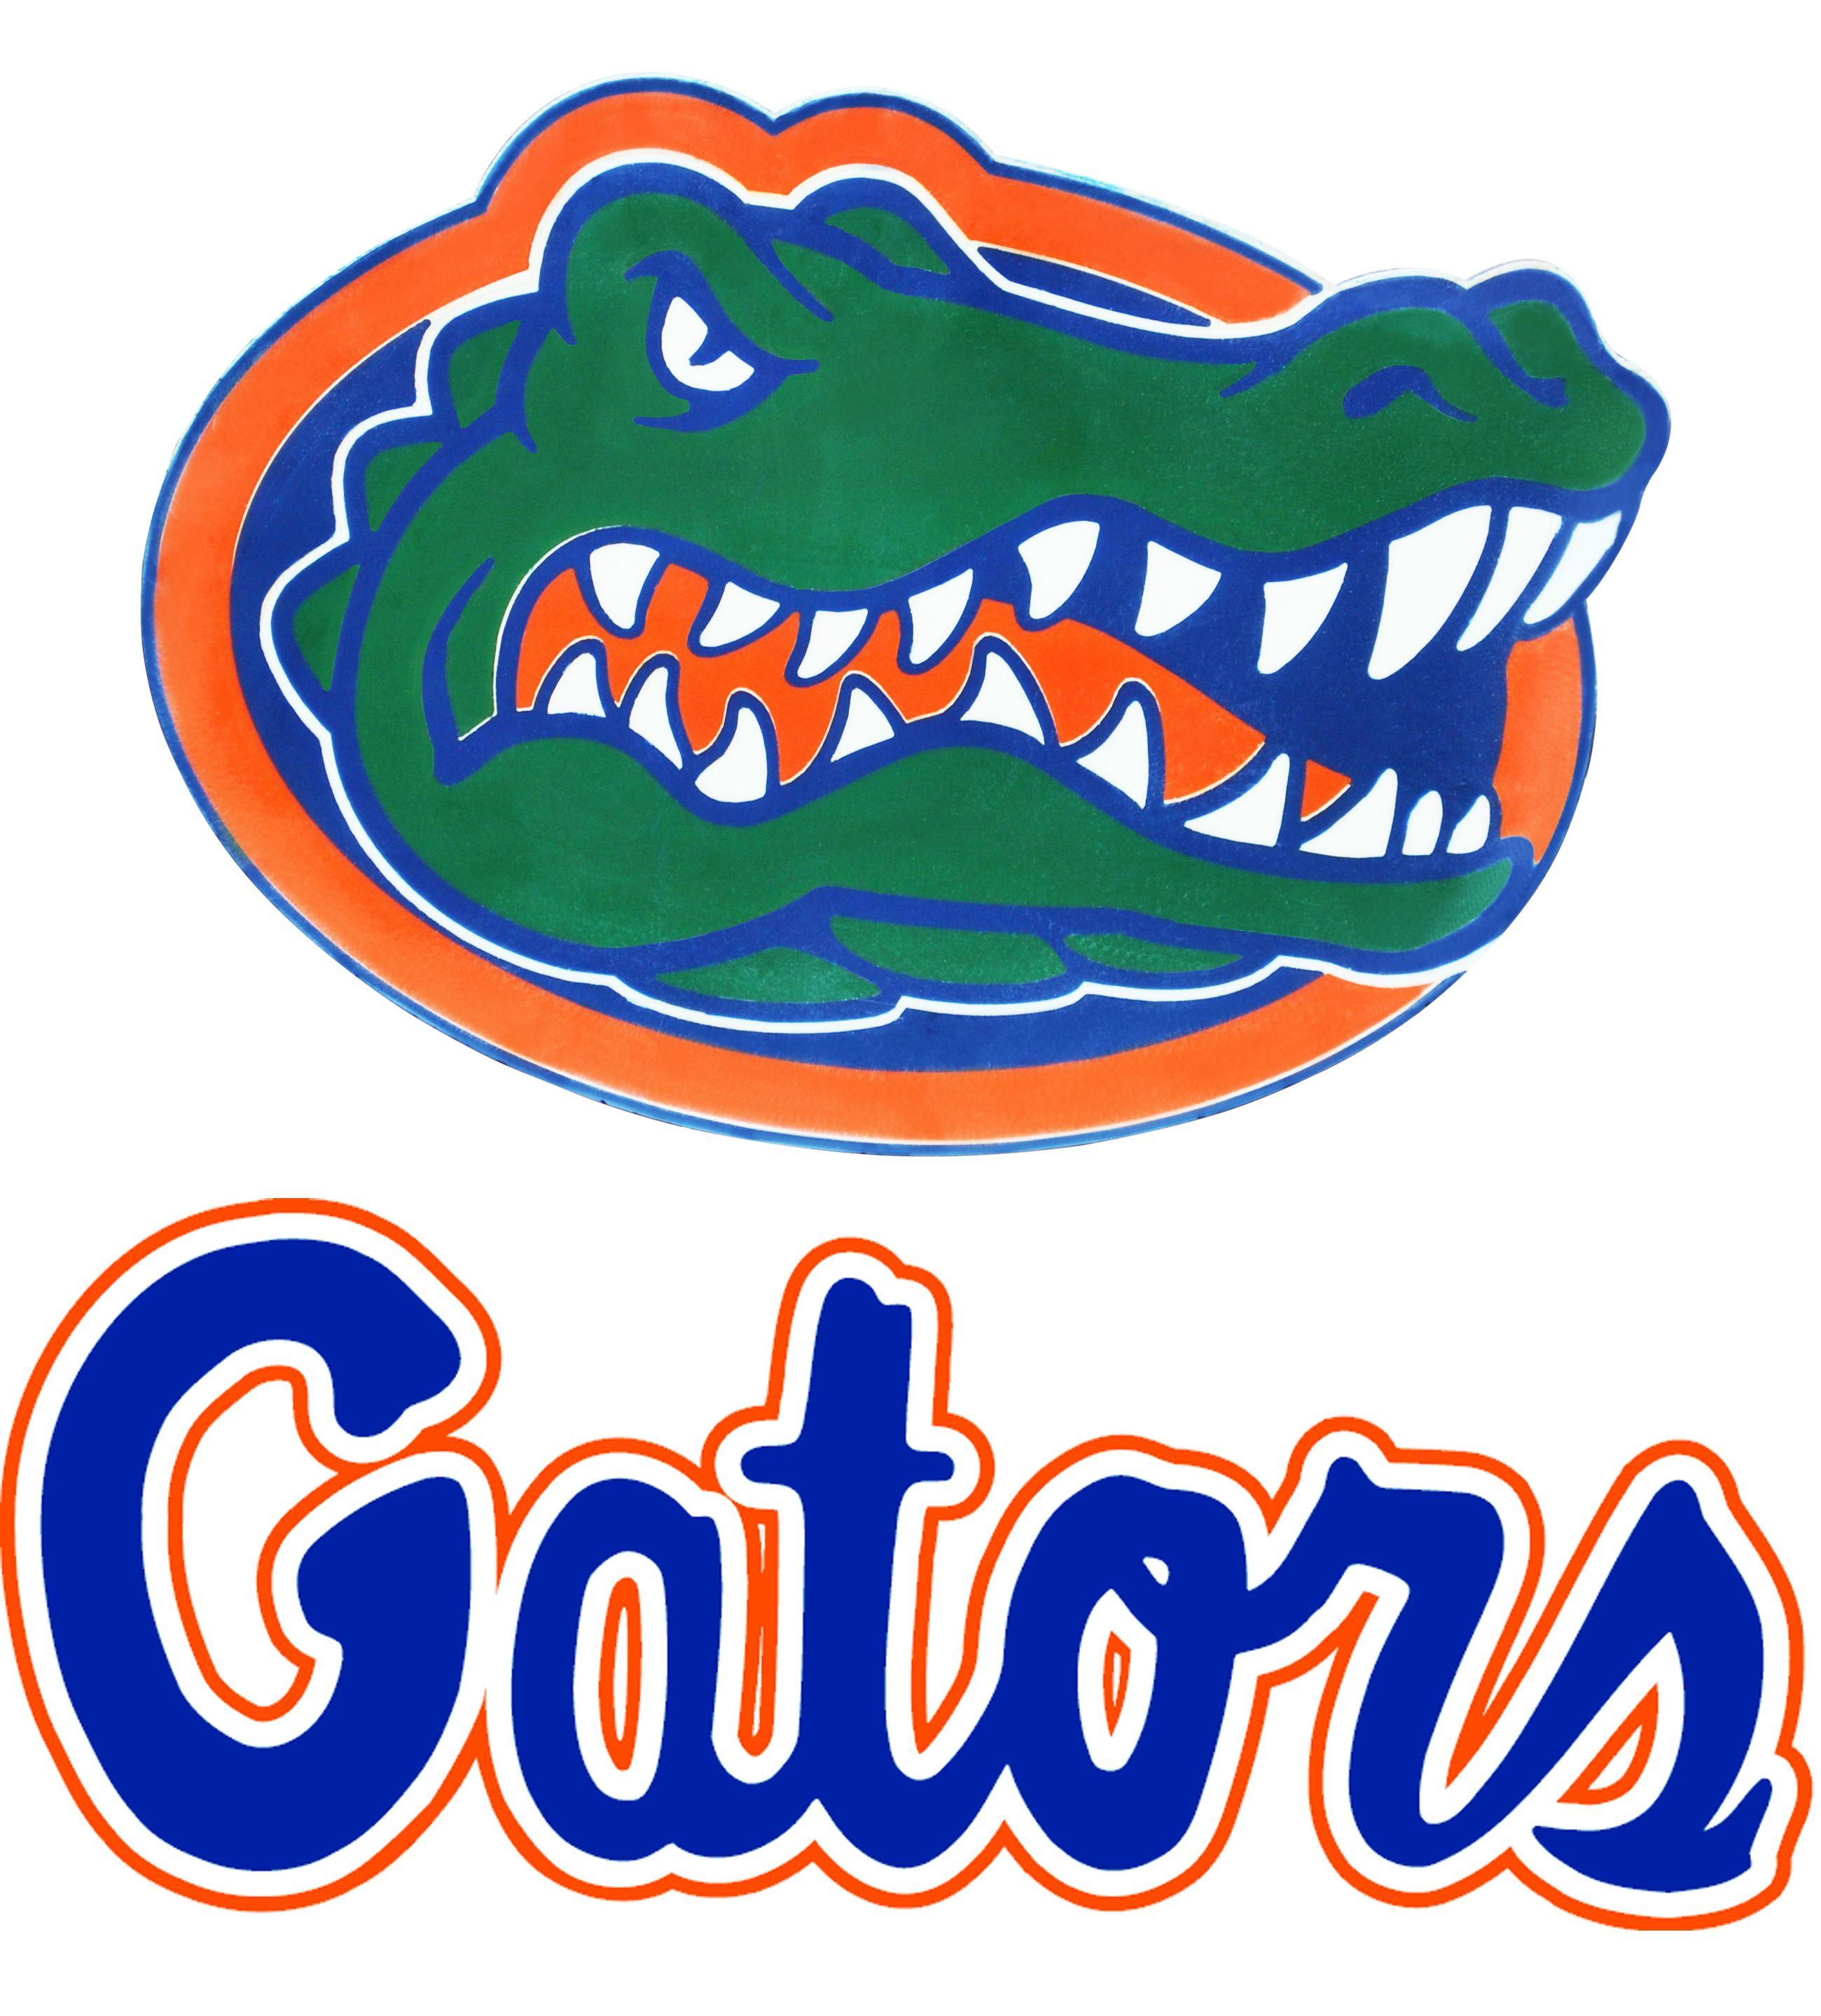 FL Gators Logo - Florida Gators Logo, Florida Gators Symbol, Meaning, History and ...